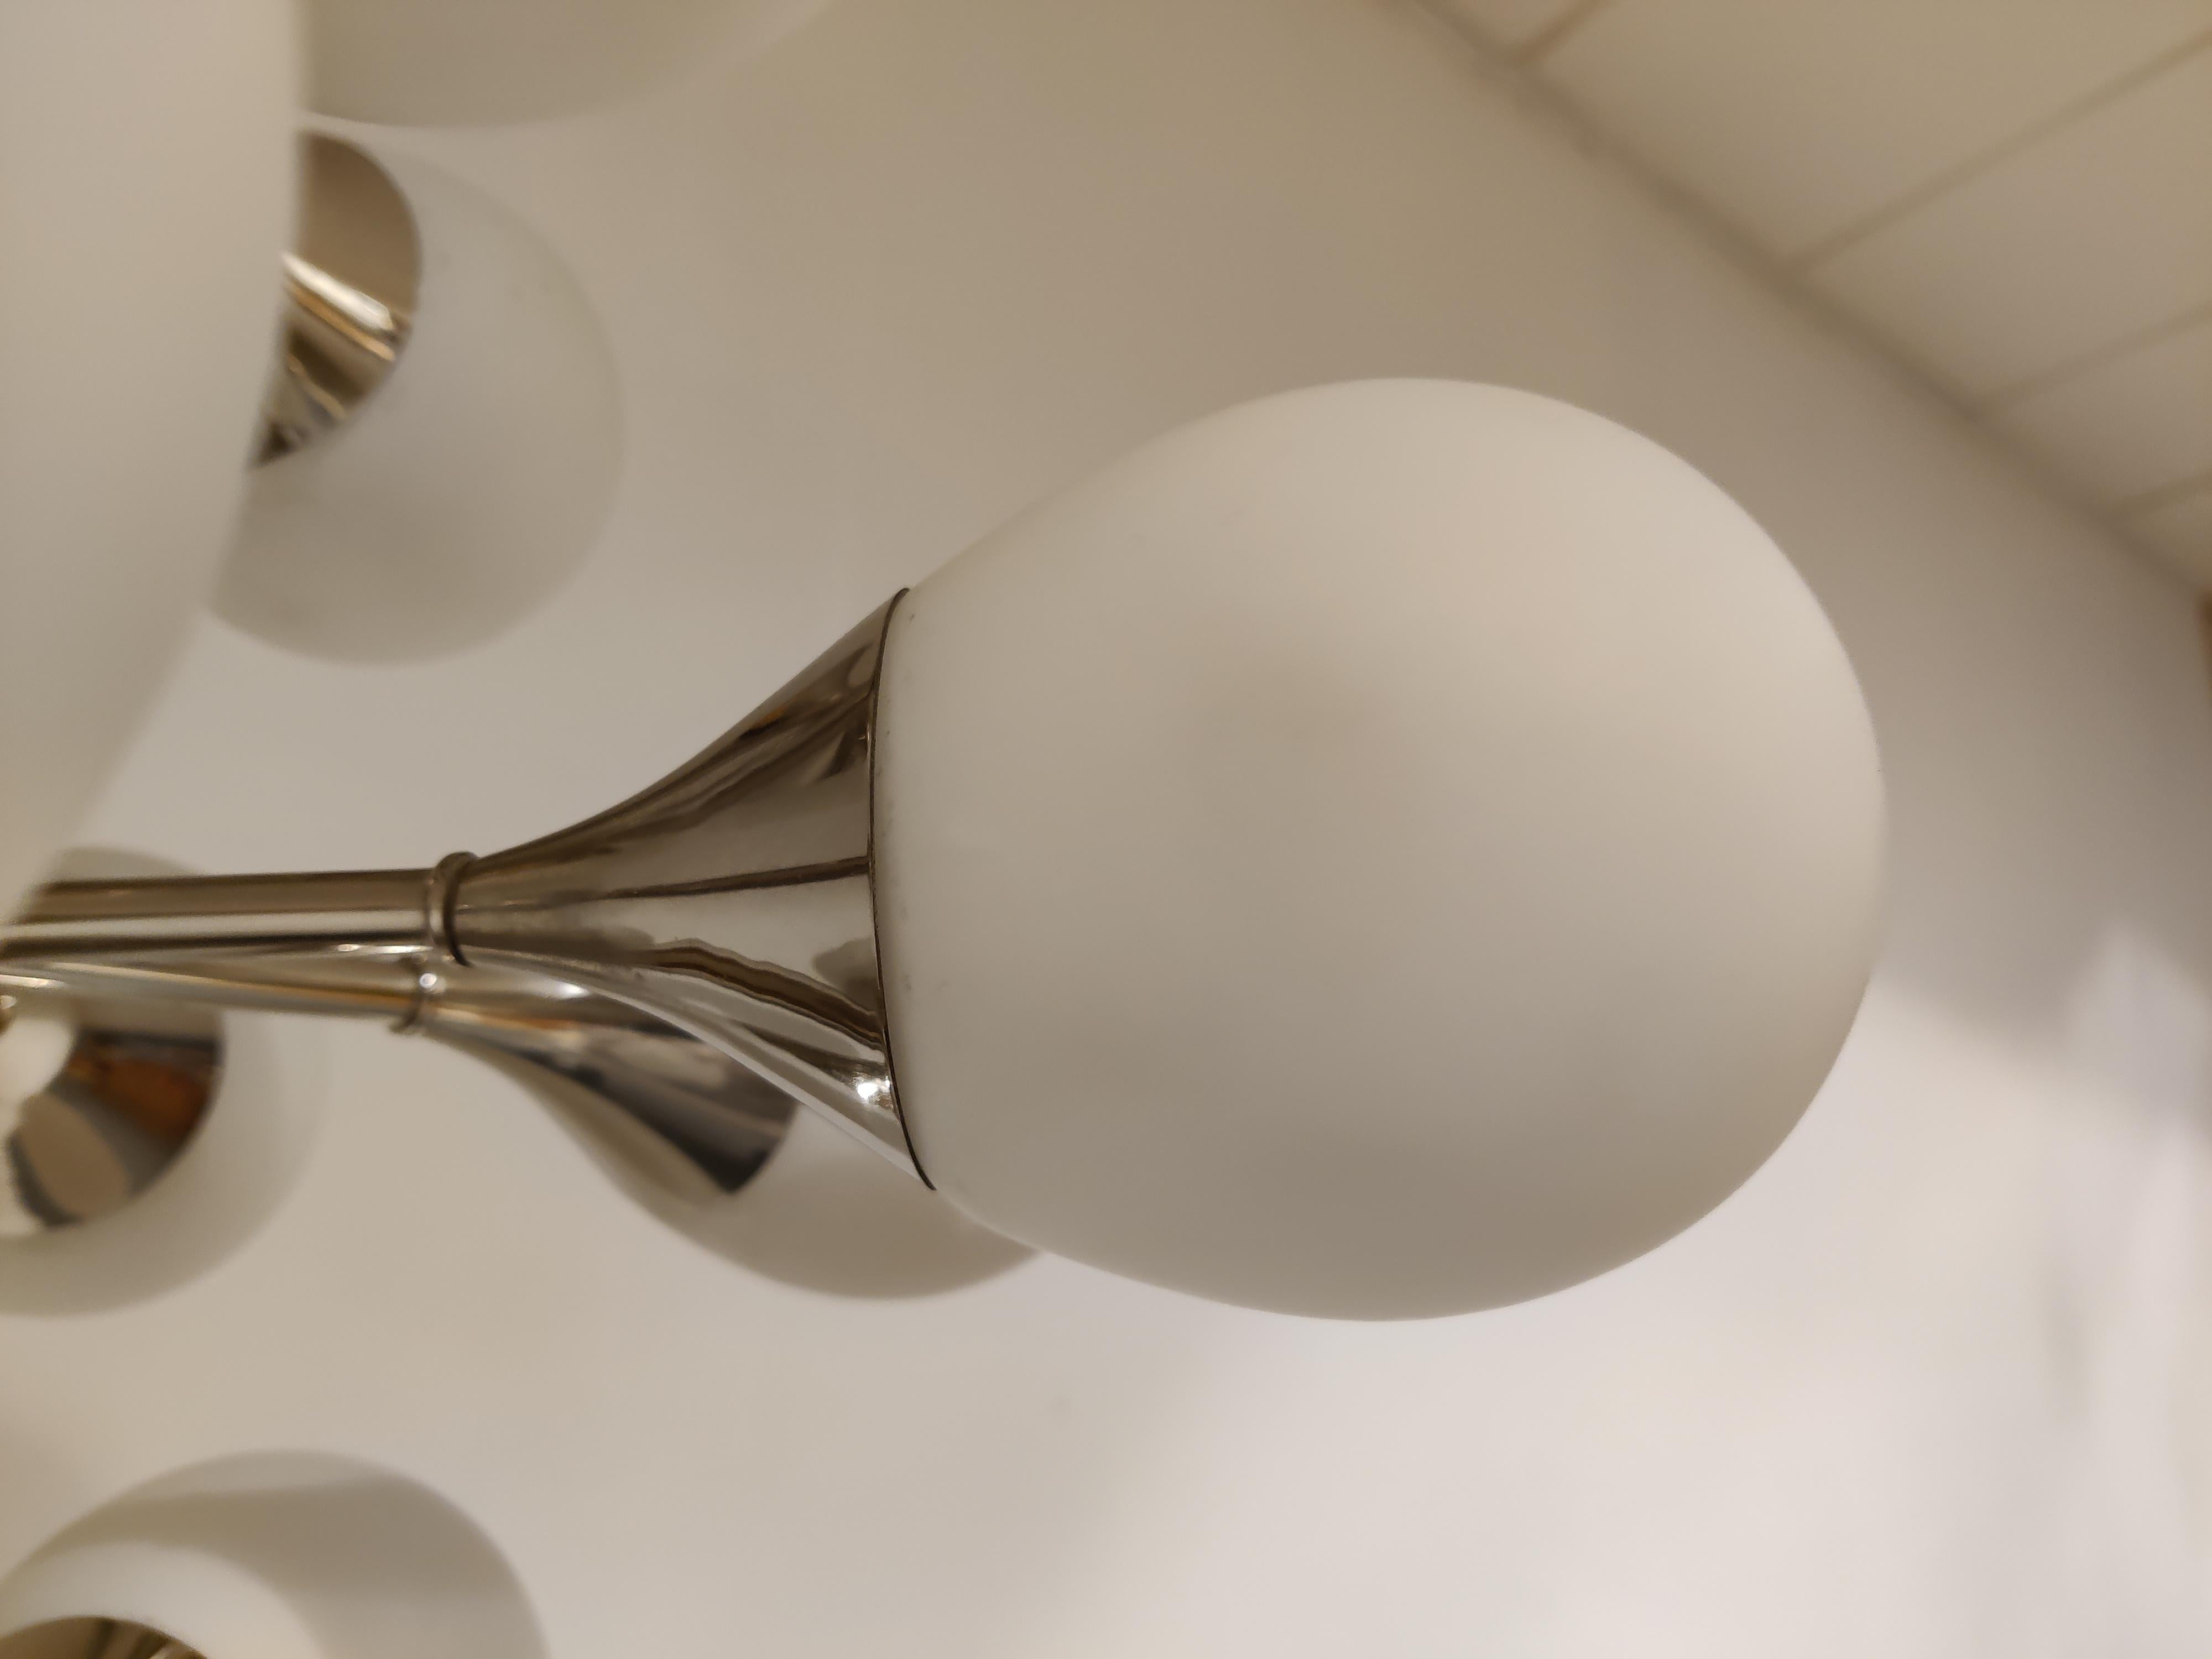 Mid-century chrome and opaline glass sputnik chandelier by Kaiser Leuchten.

Lovely teardrop shaped white glass shades.

The chandelier emits a ambient diverted light.

The chandelier has 12 E14 light points.

The lamp has been